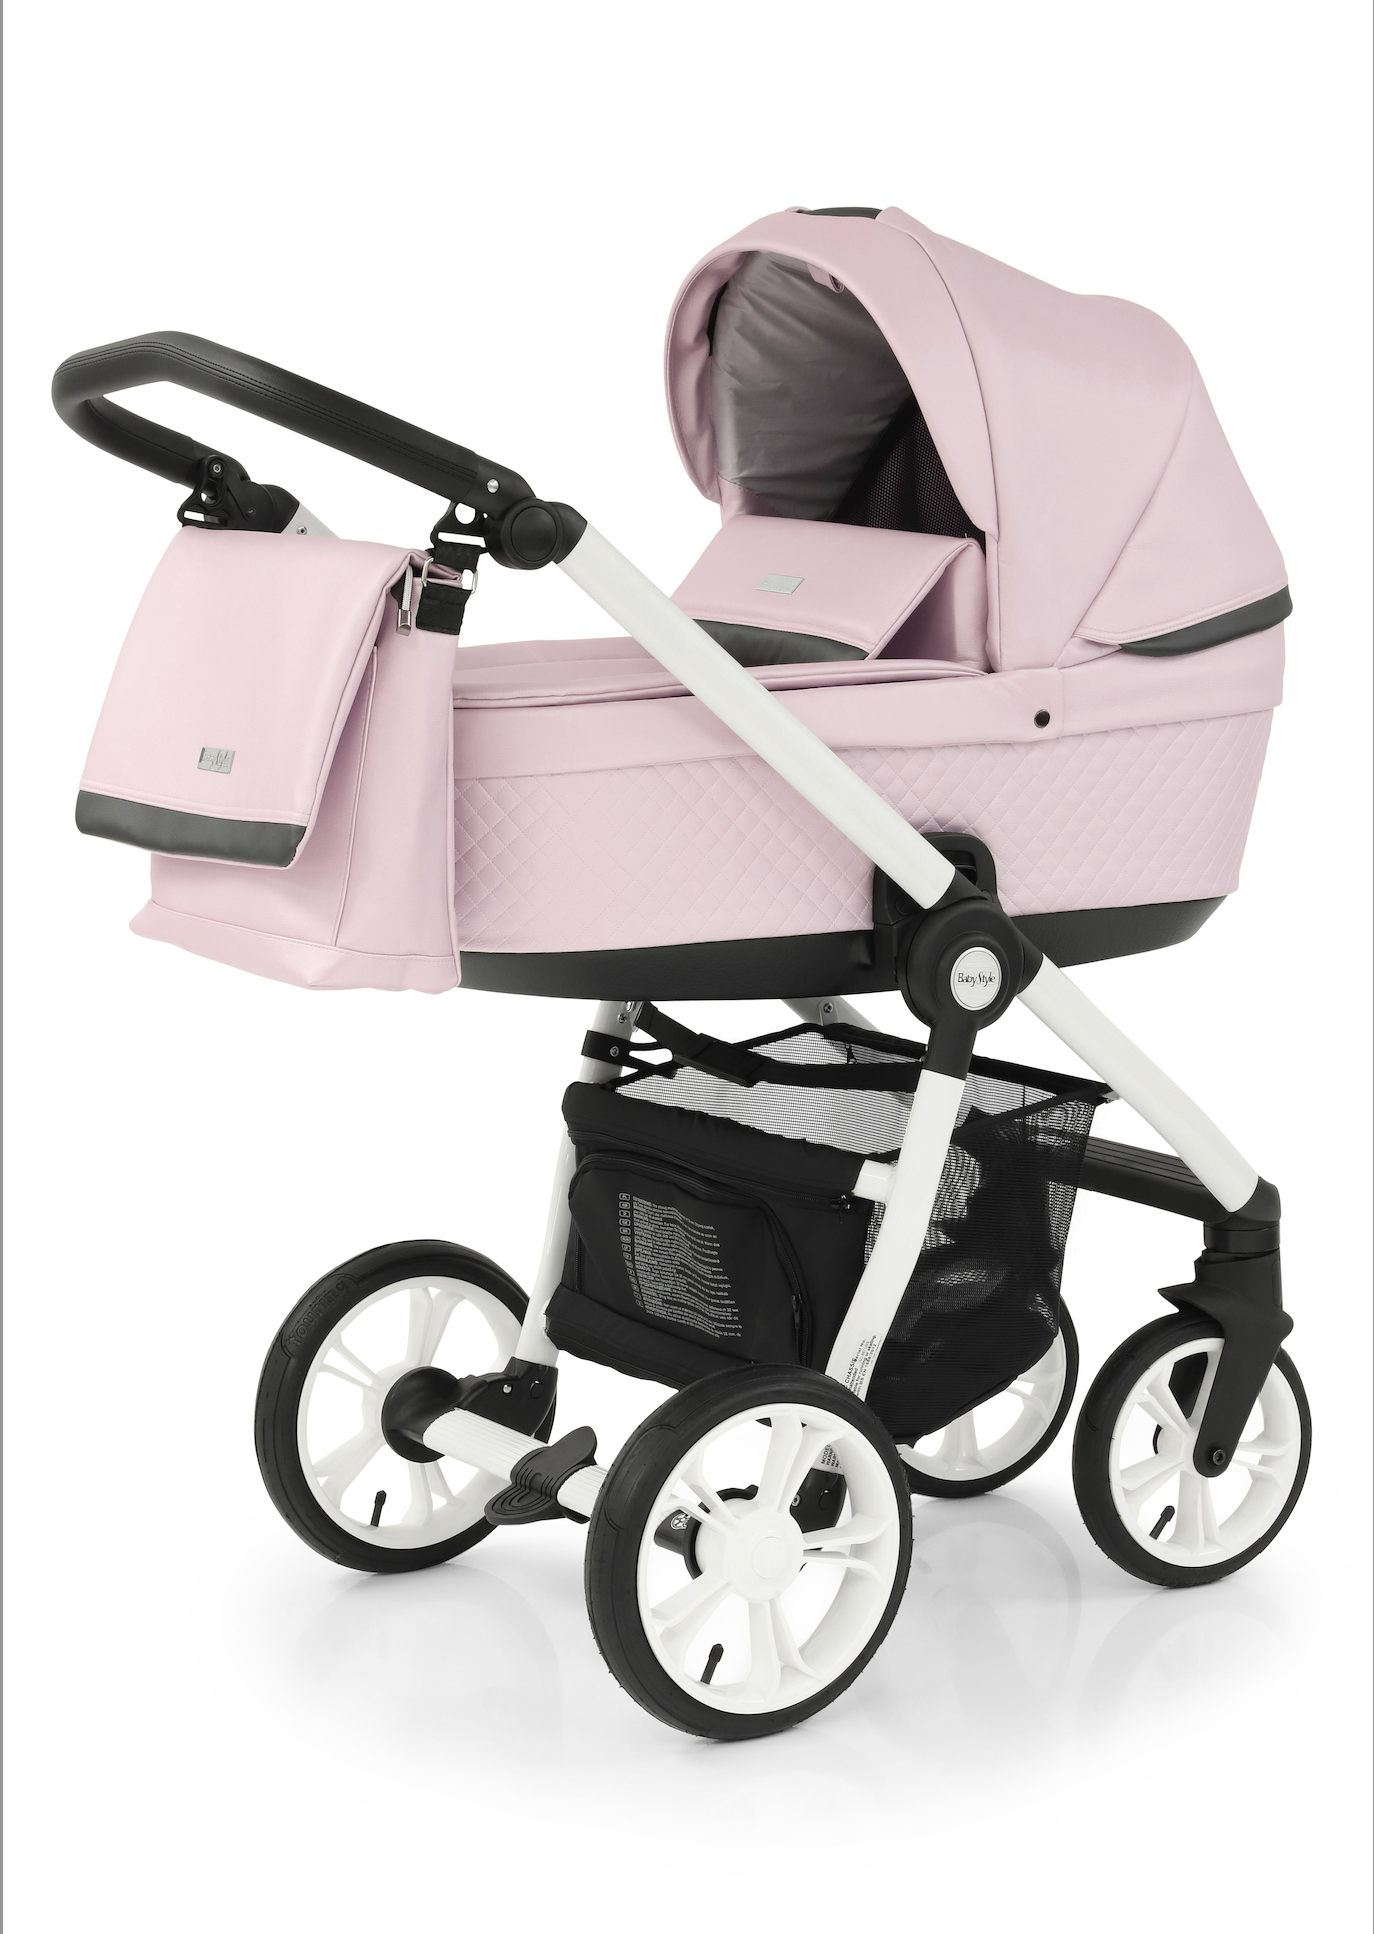 BabyStyle Prestige Travel System - Active Chassis